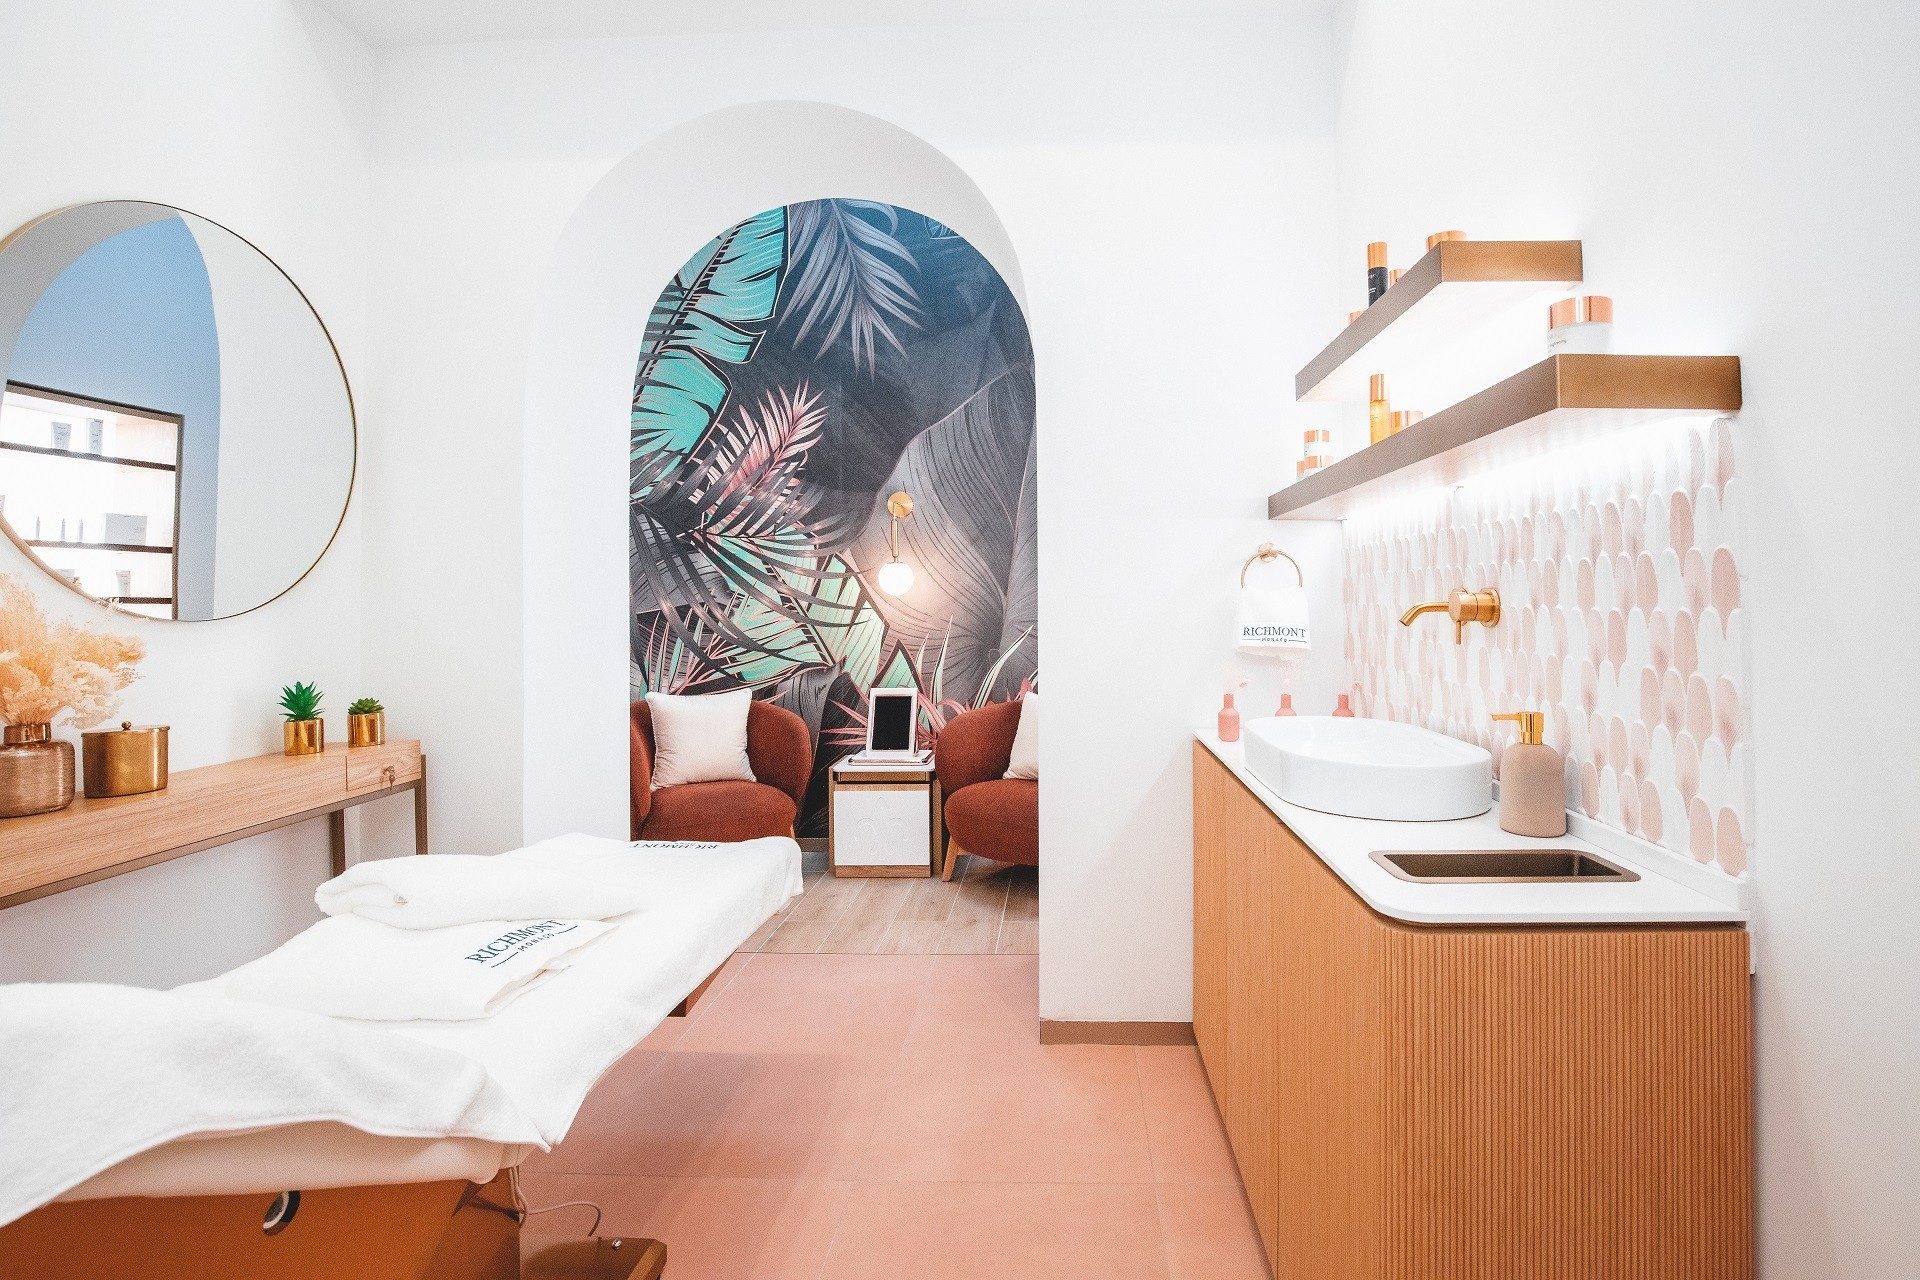 About us at Richmont Monaco, one of our treatment cabins